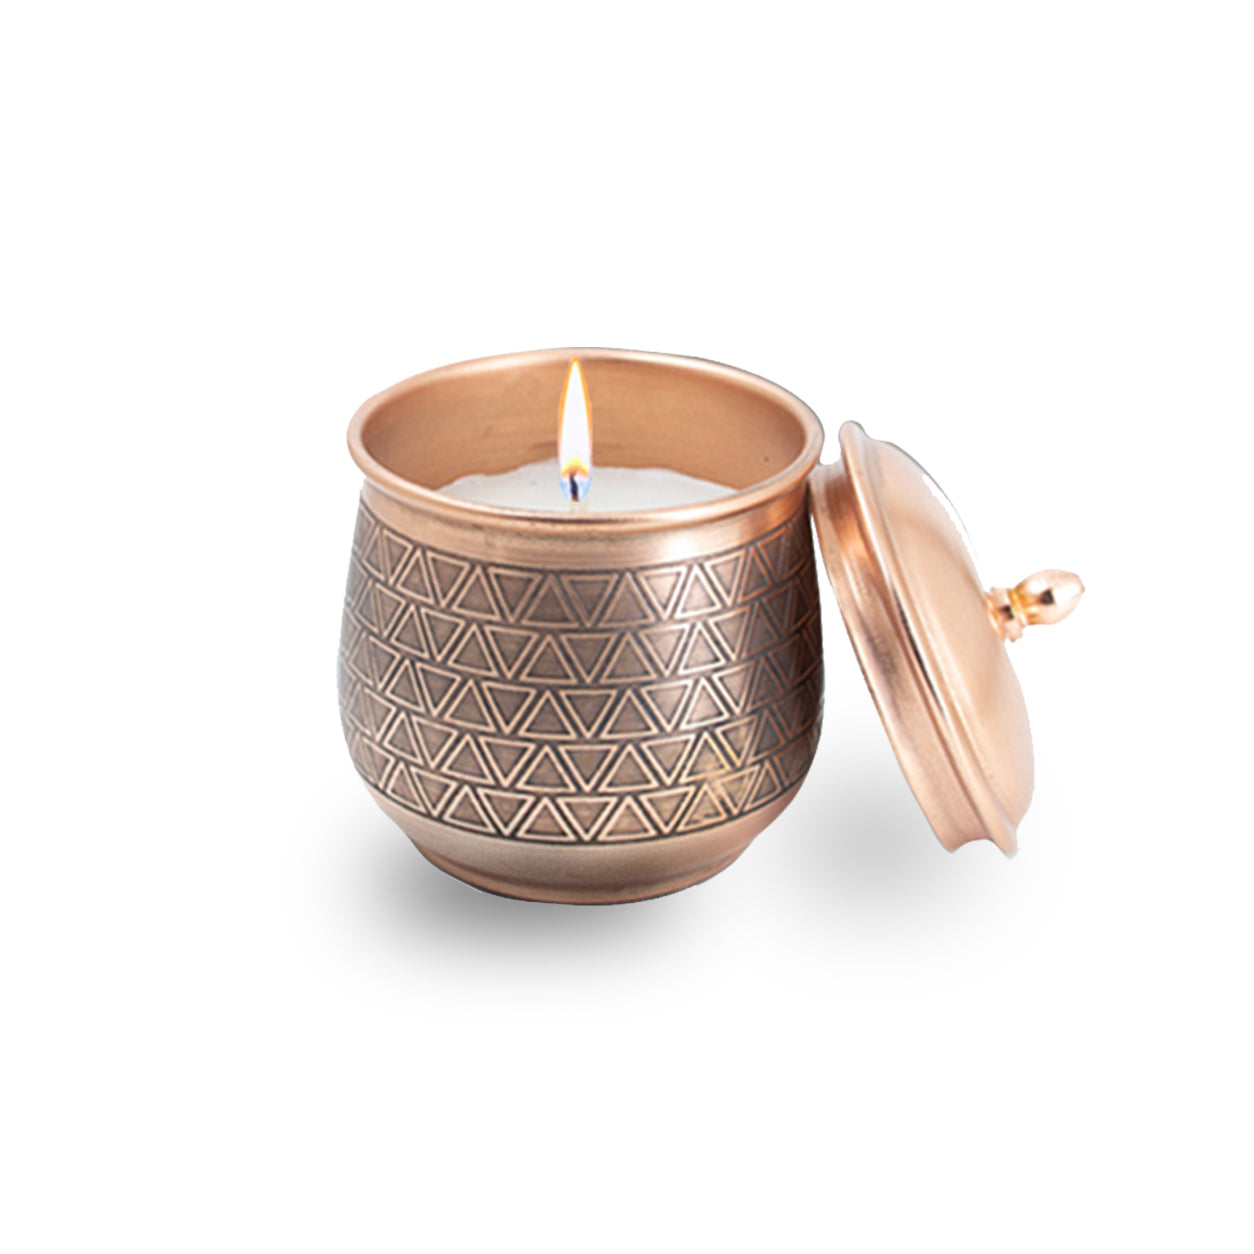 Natural Organic Aroma Soy Wax Scented Candles | Intensely fragranced Candles | Scented Aromatic Fragrance | Copper Finish Metal Jar